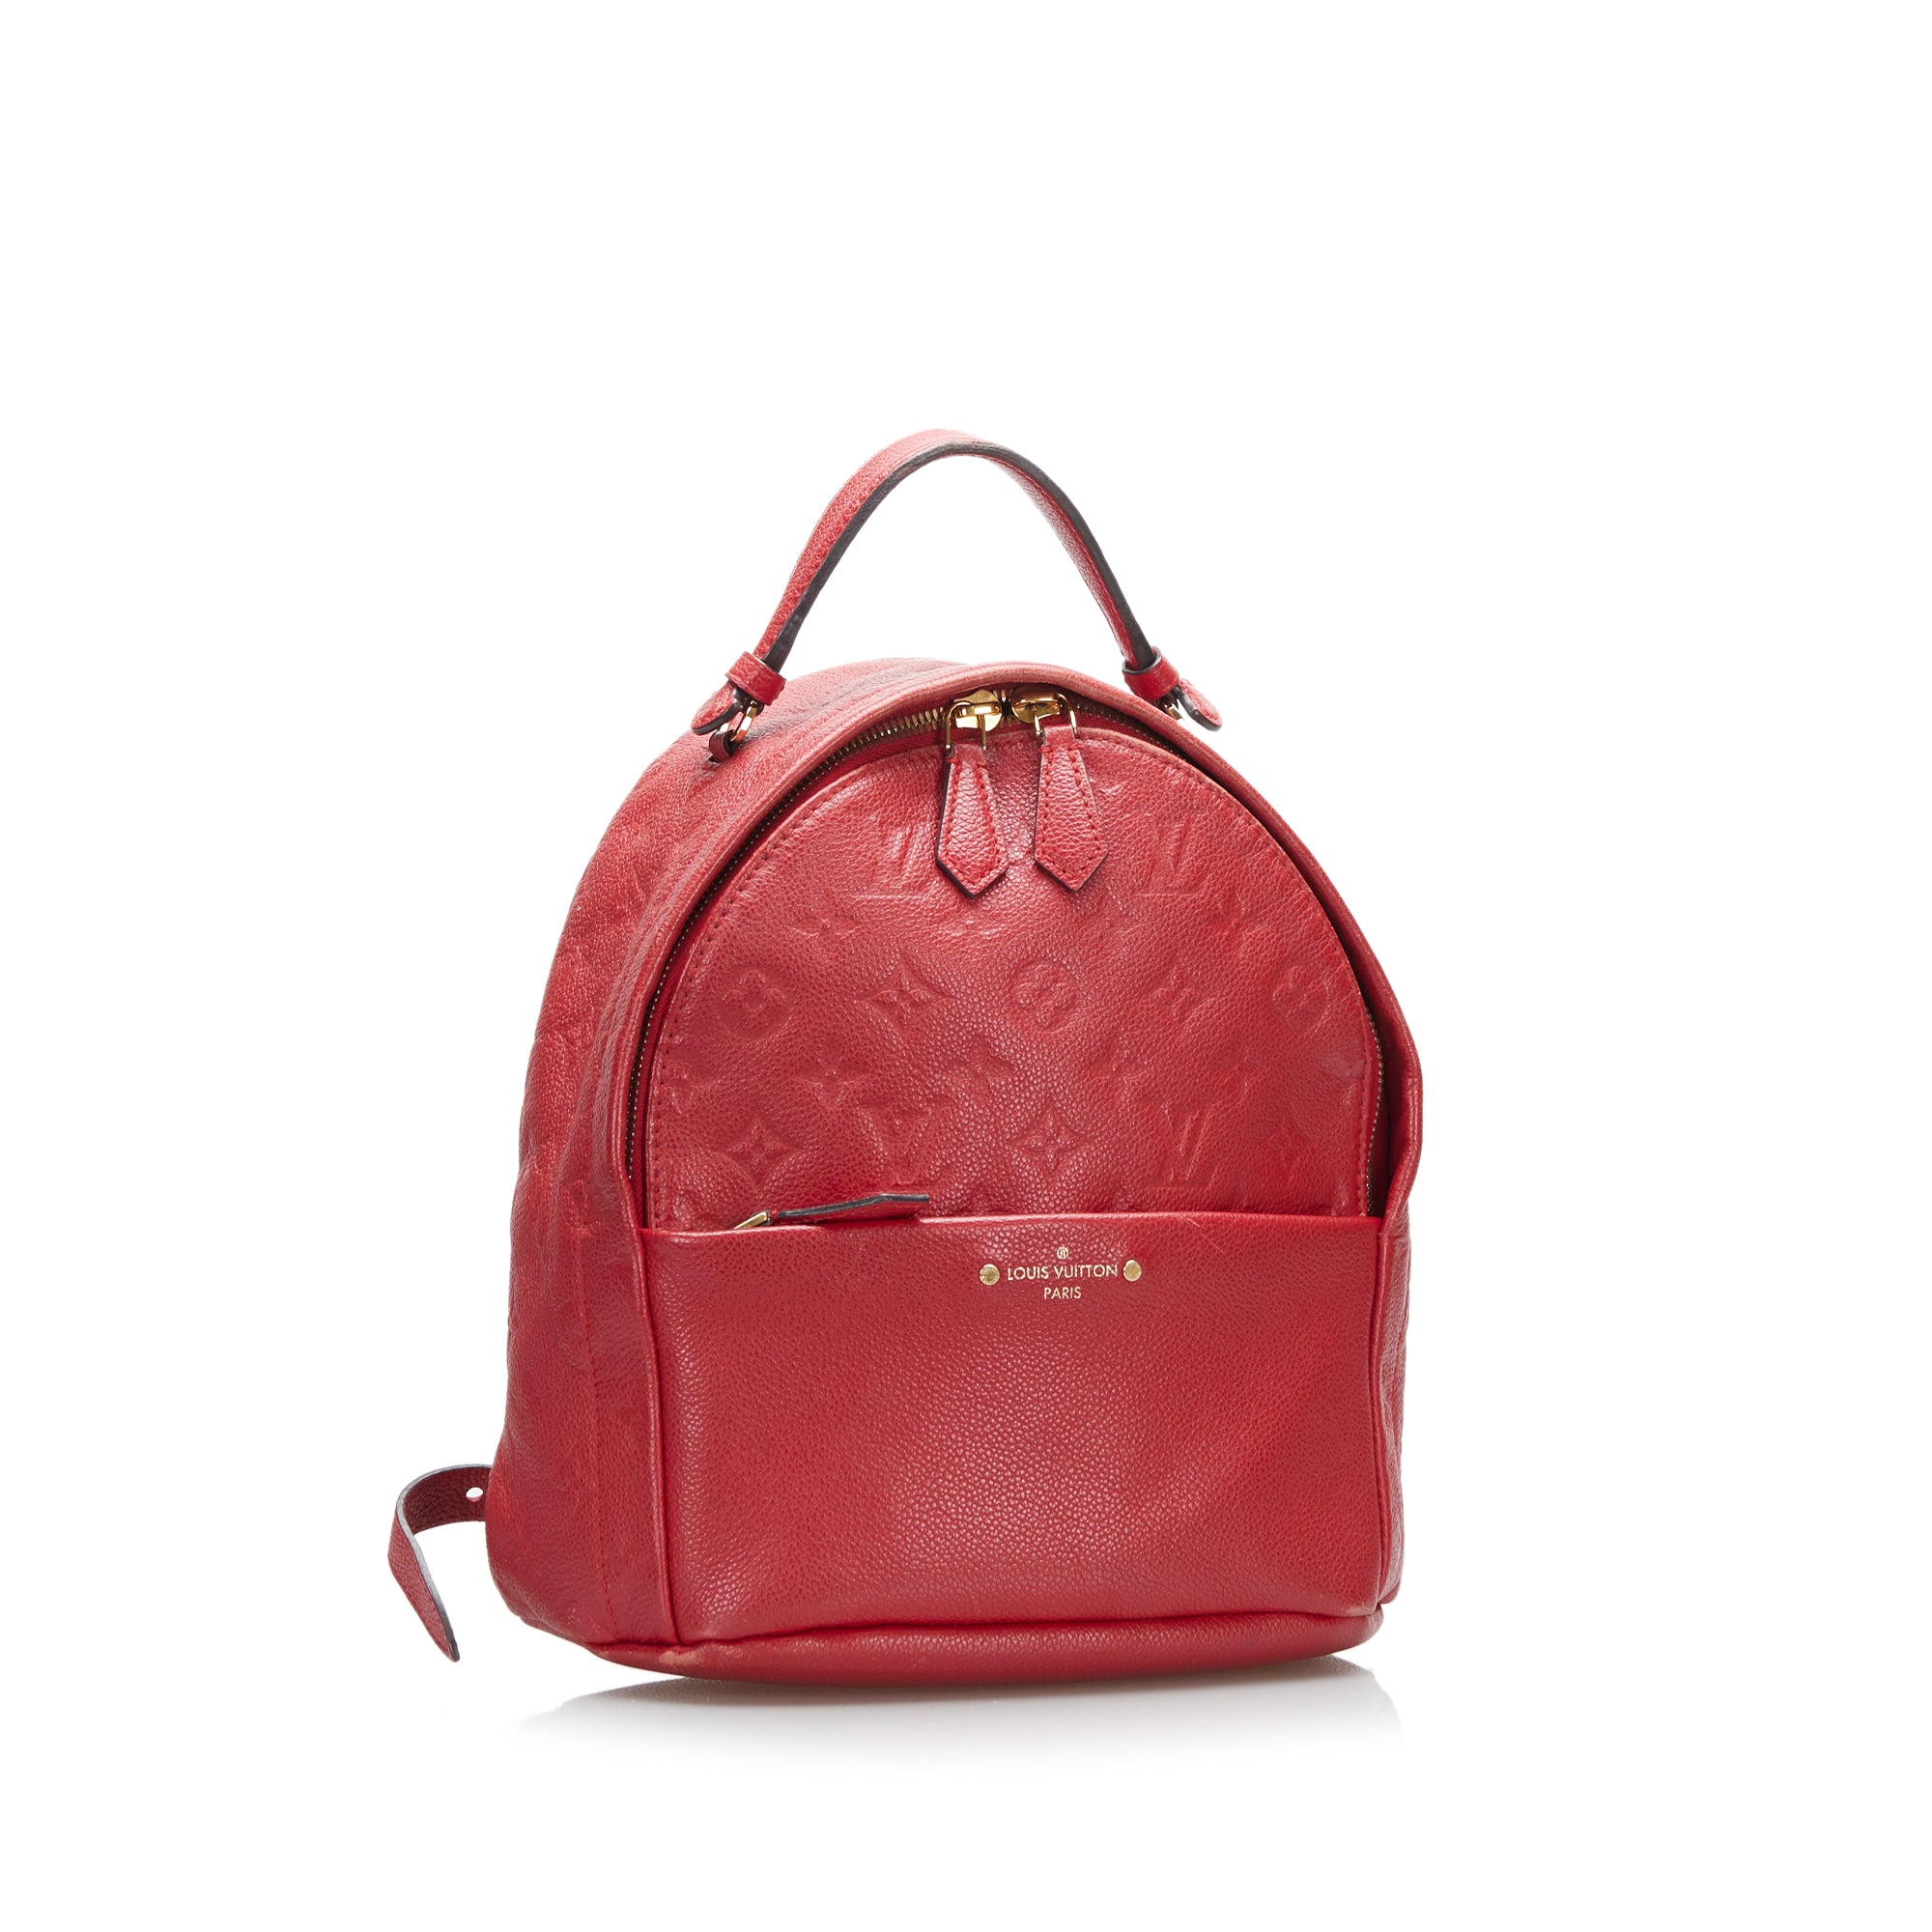 Unisex Pre-Owned Authenticated Louis Vuitton Sorbonne Monogram Empreinte  Leather Red Backpack 